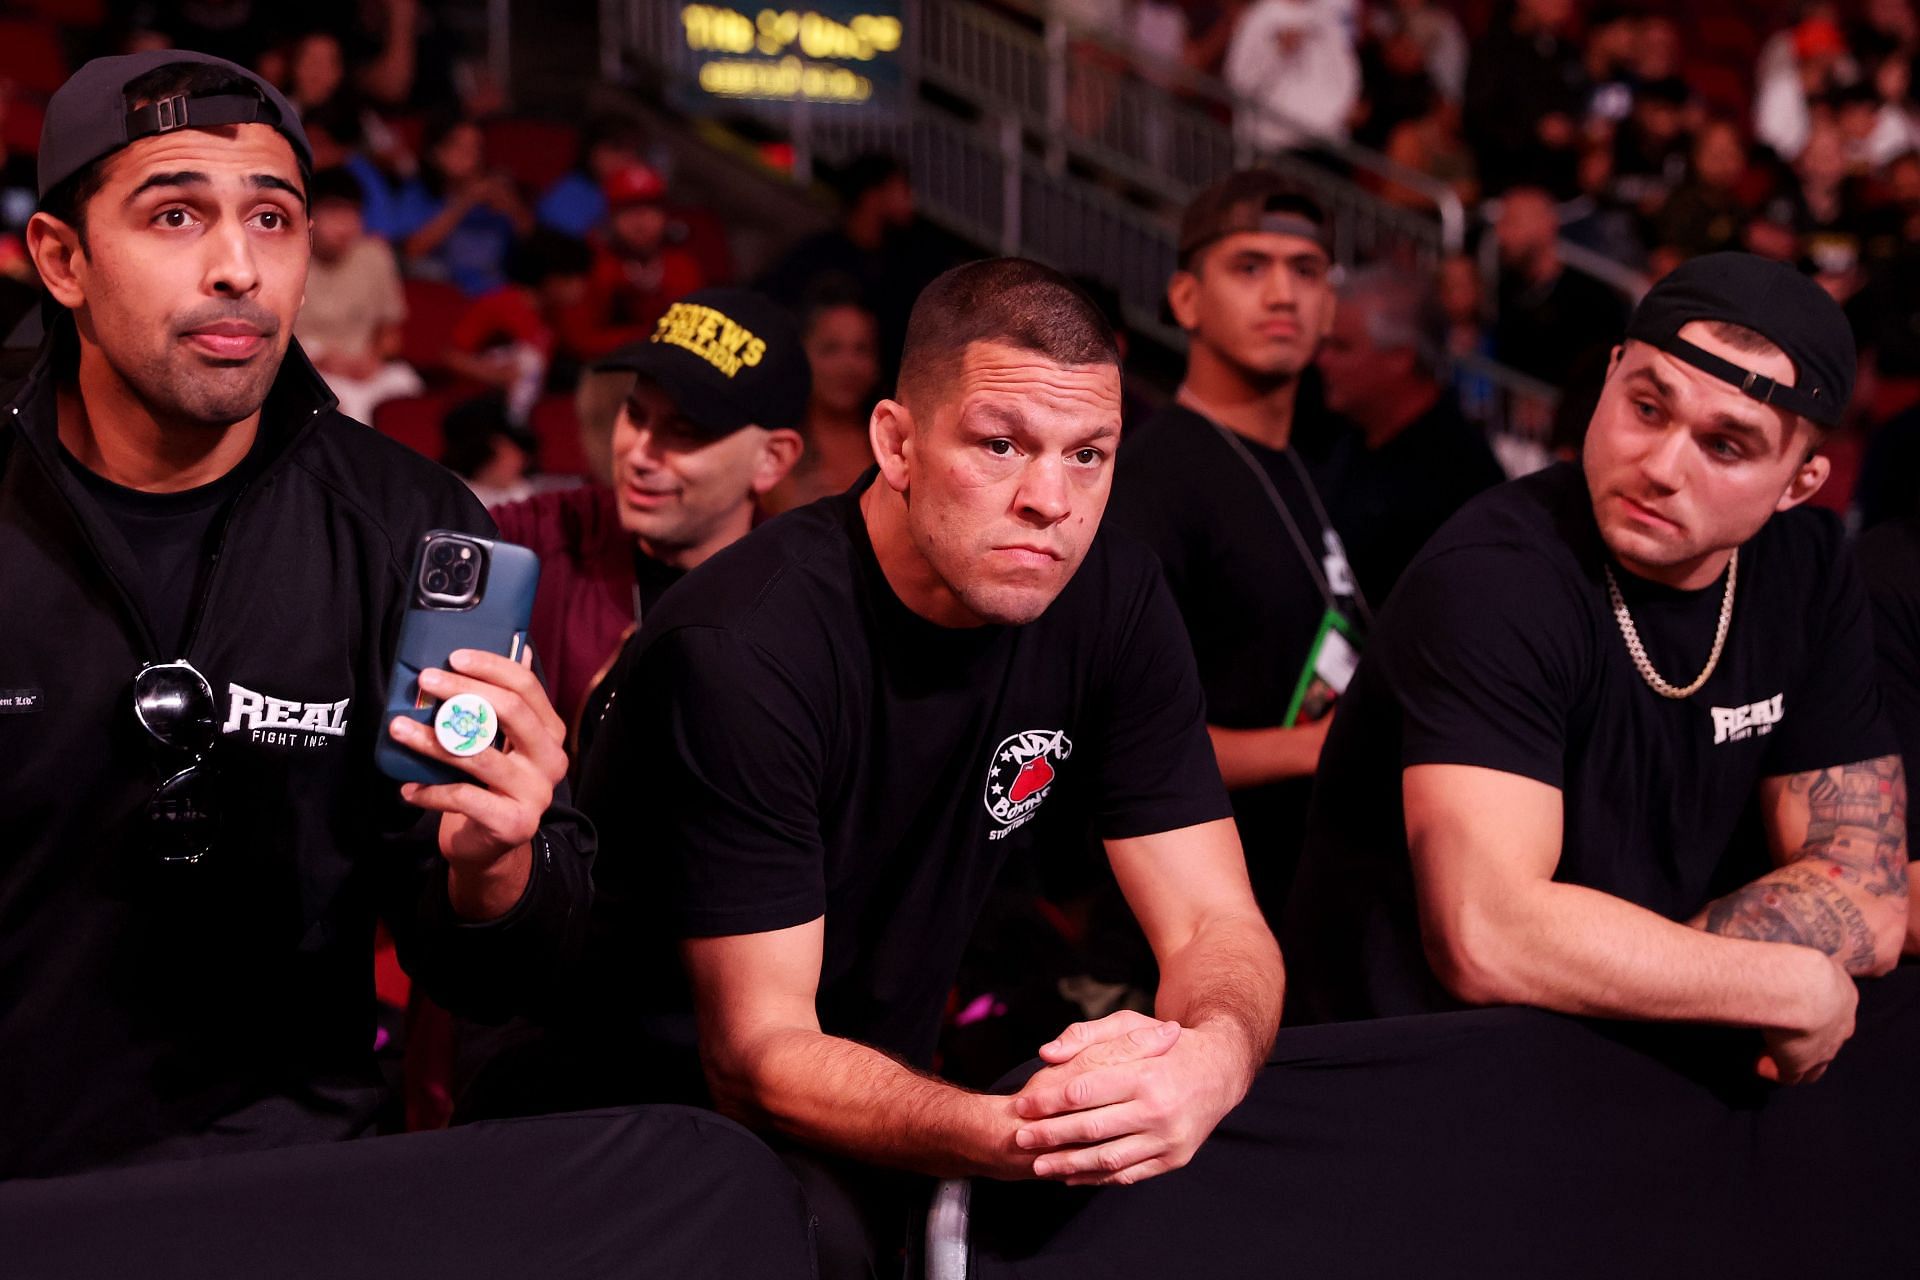 Nate Diaz has a ready-made rivalry with Jake Paul to build a fight with